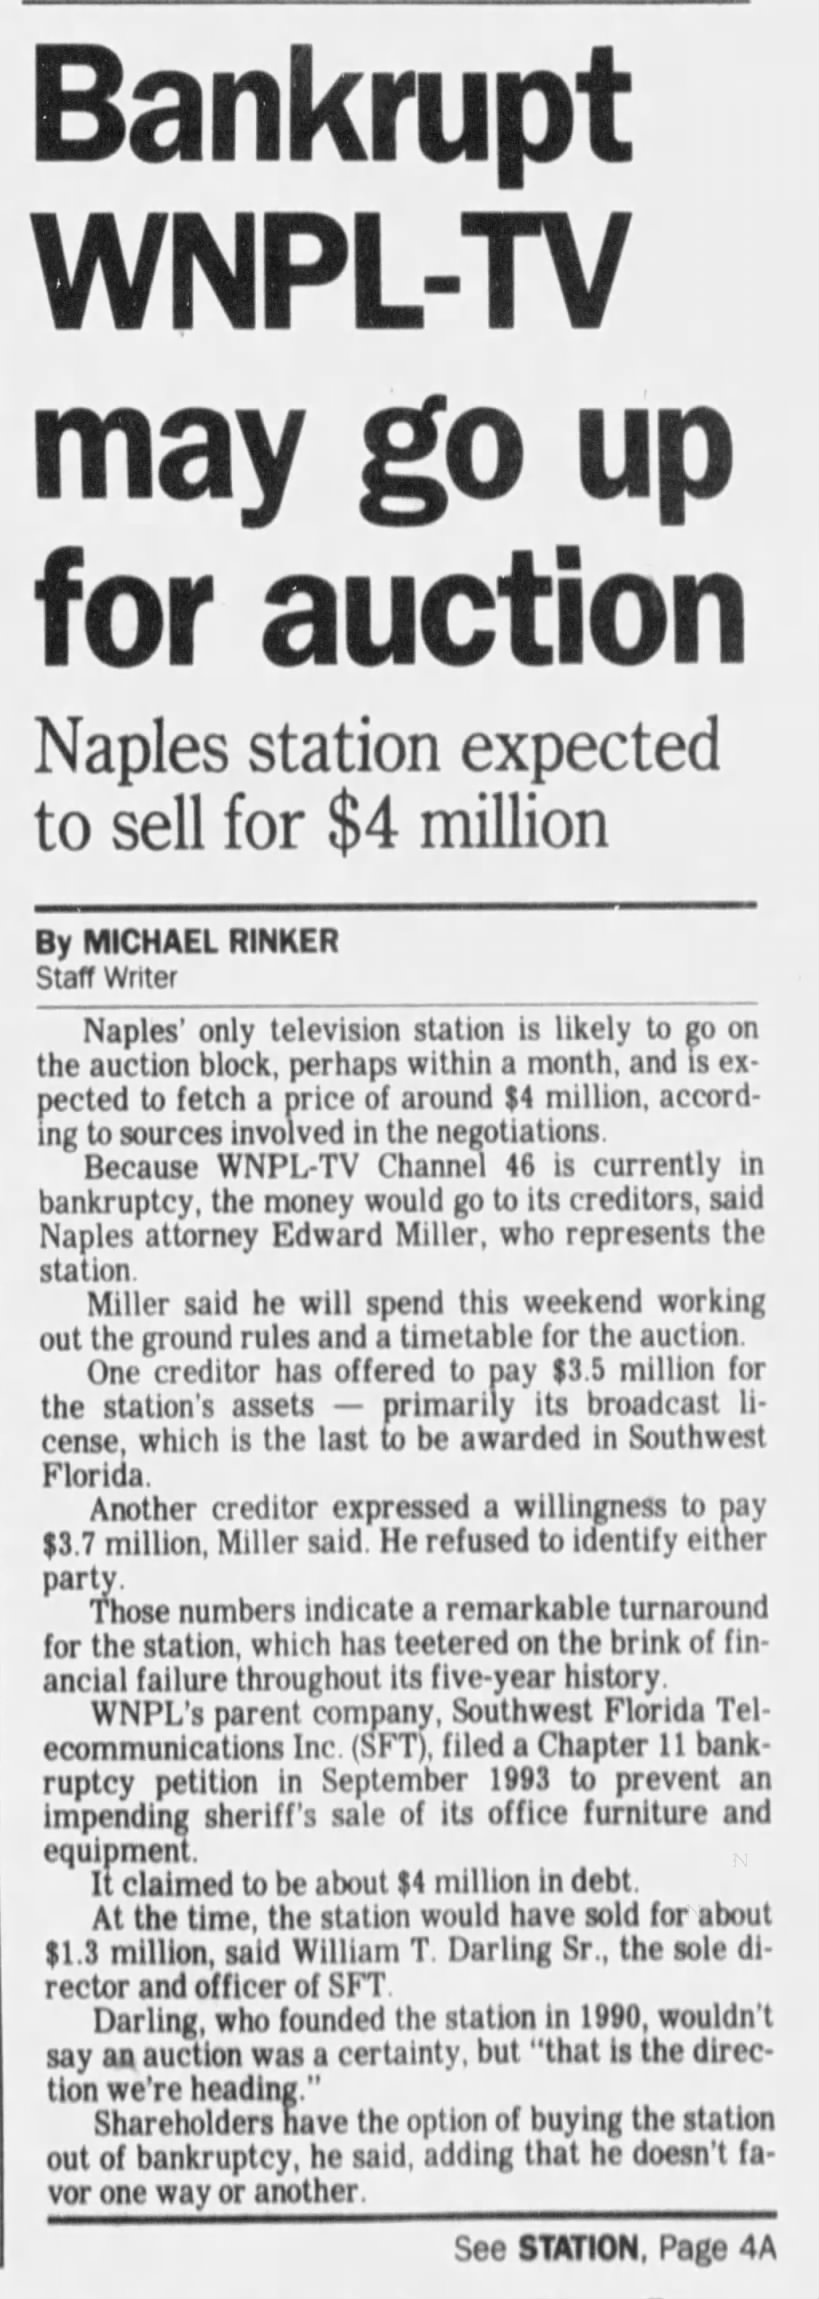 Bankrupt WNPL-TV may go up for auction: Naples station expected to sell for $4 million